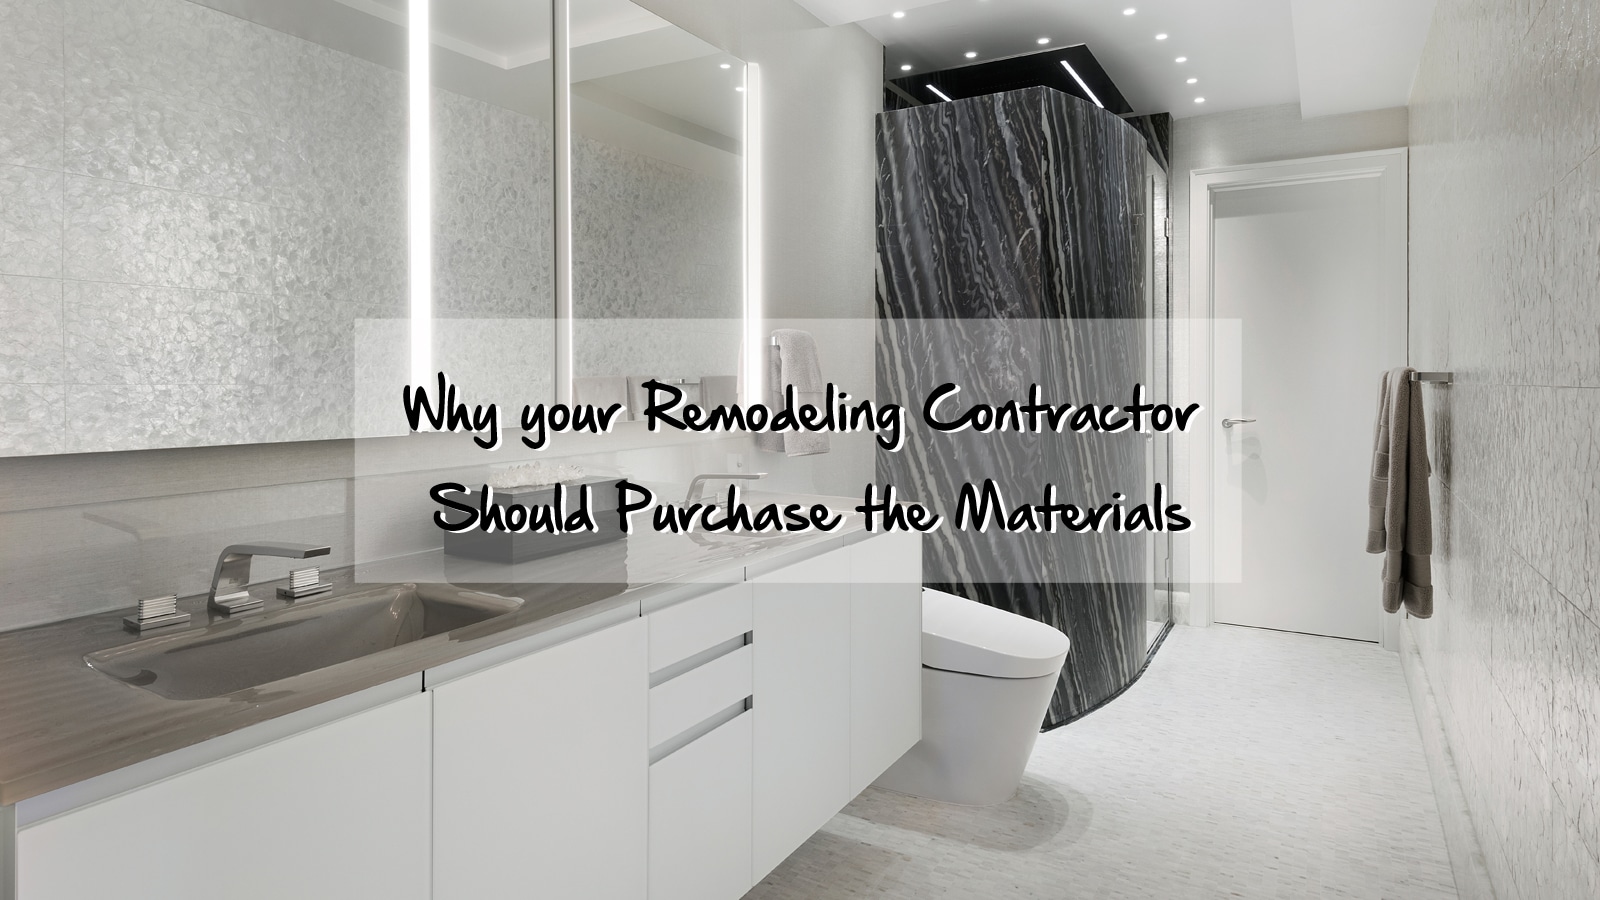 Why your Remodeling Contractor Should Purchase the Materials